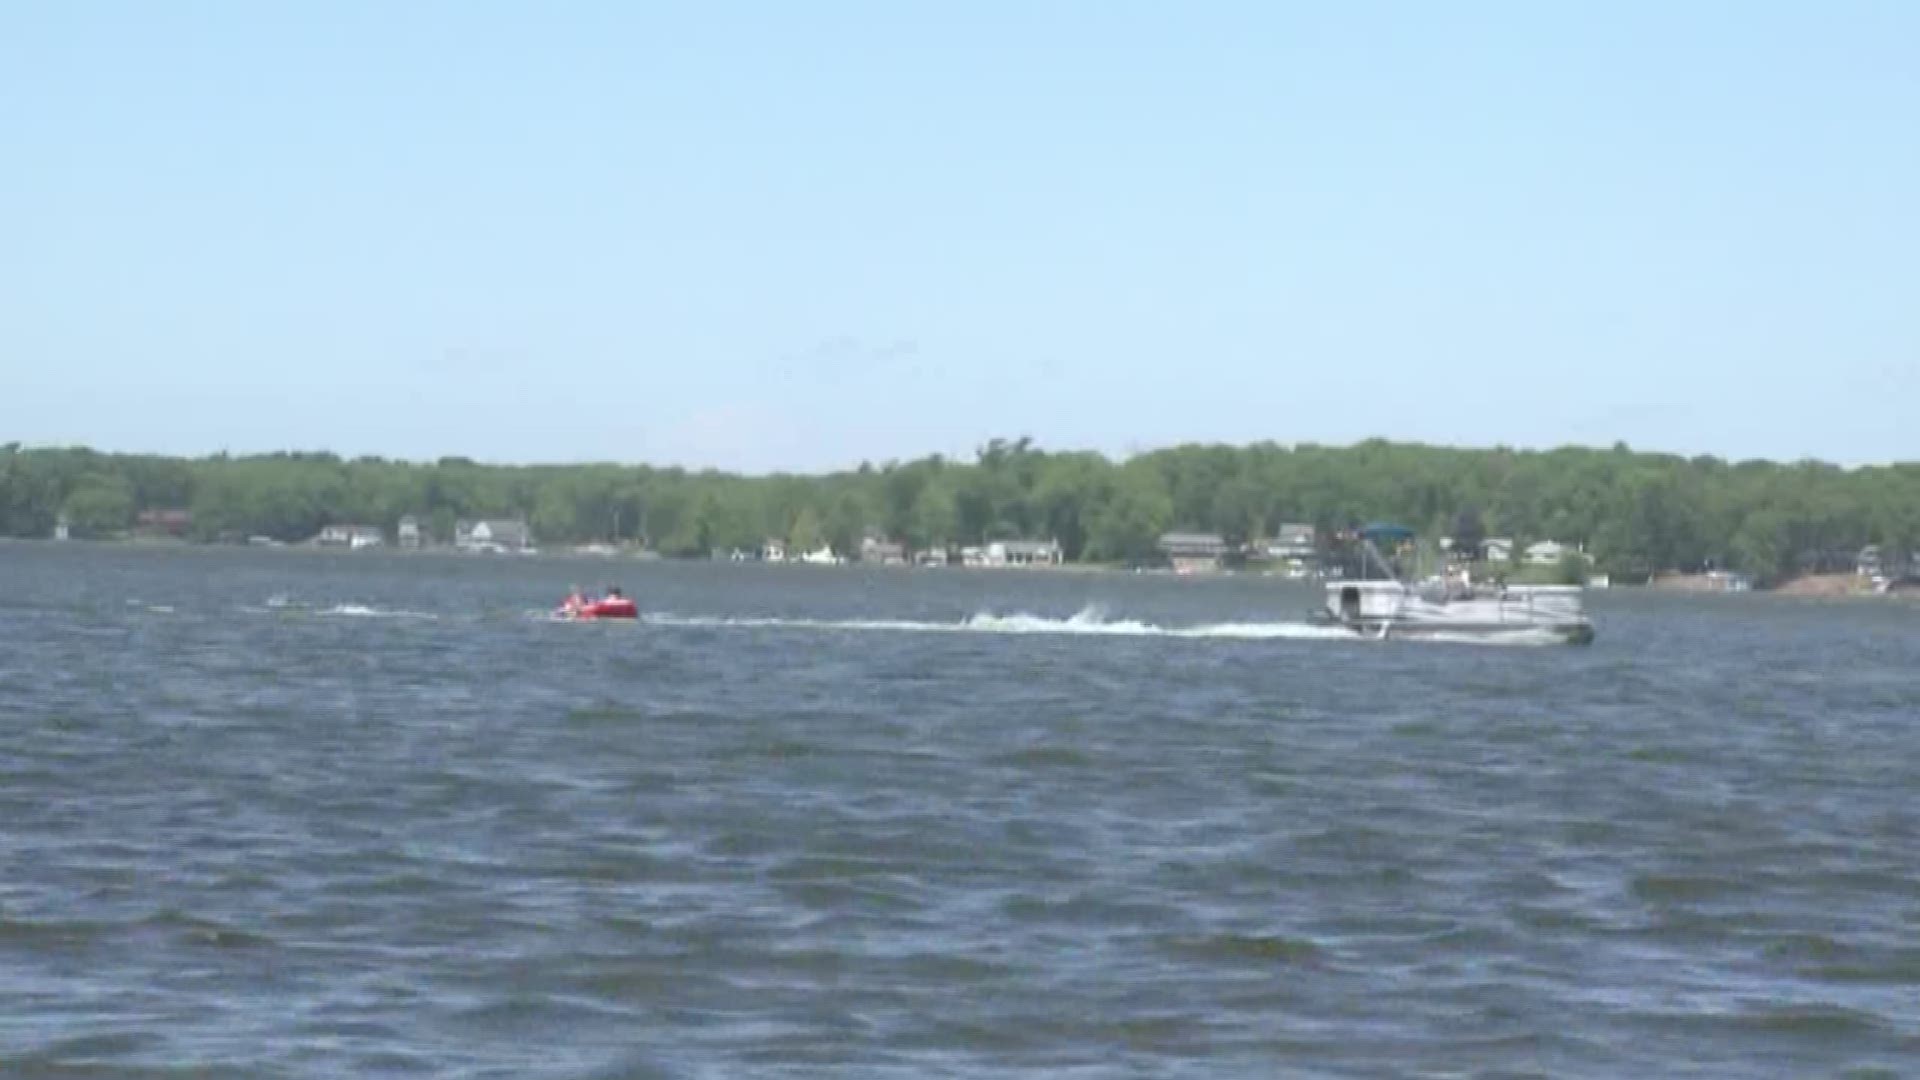 The holiday weekend is over, but some people living in Newaygo County still have concerns about the marine patrol.